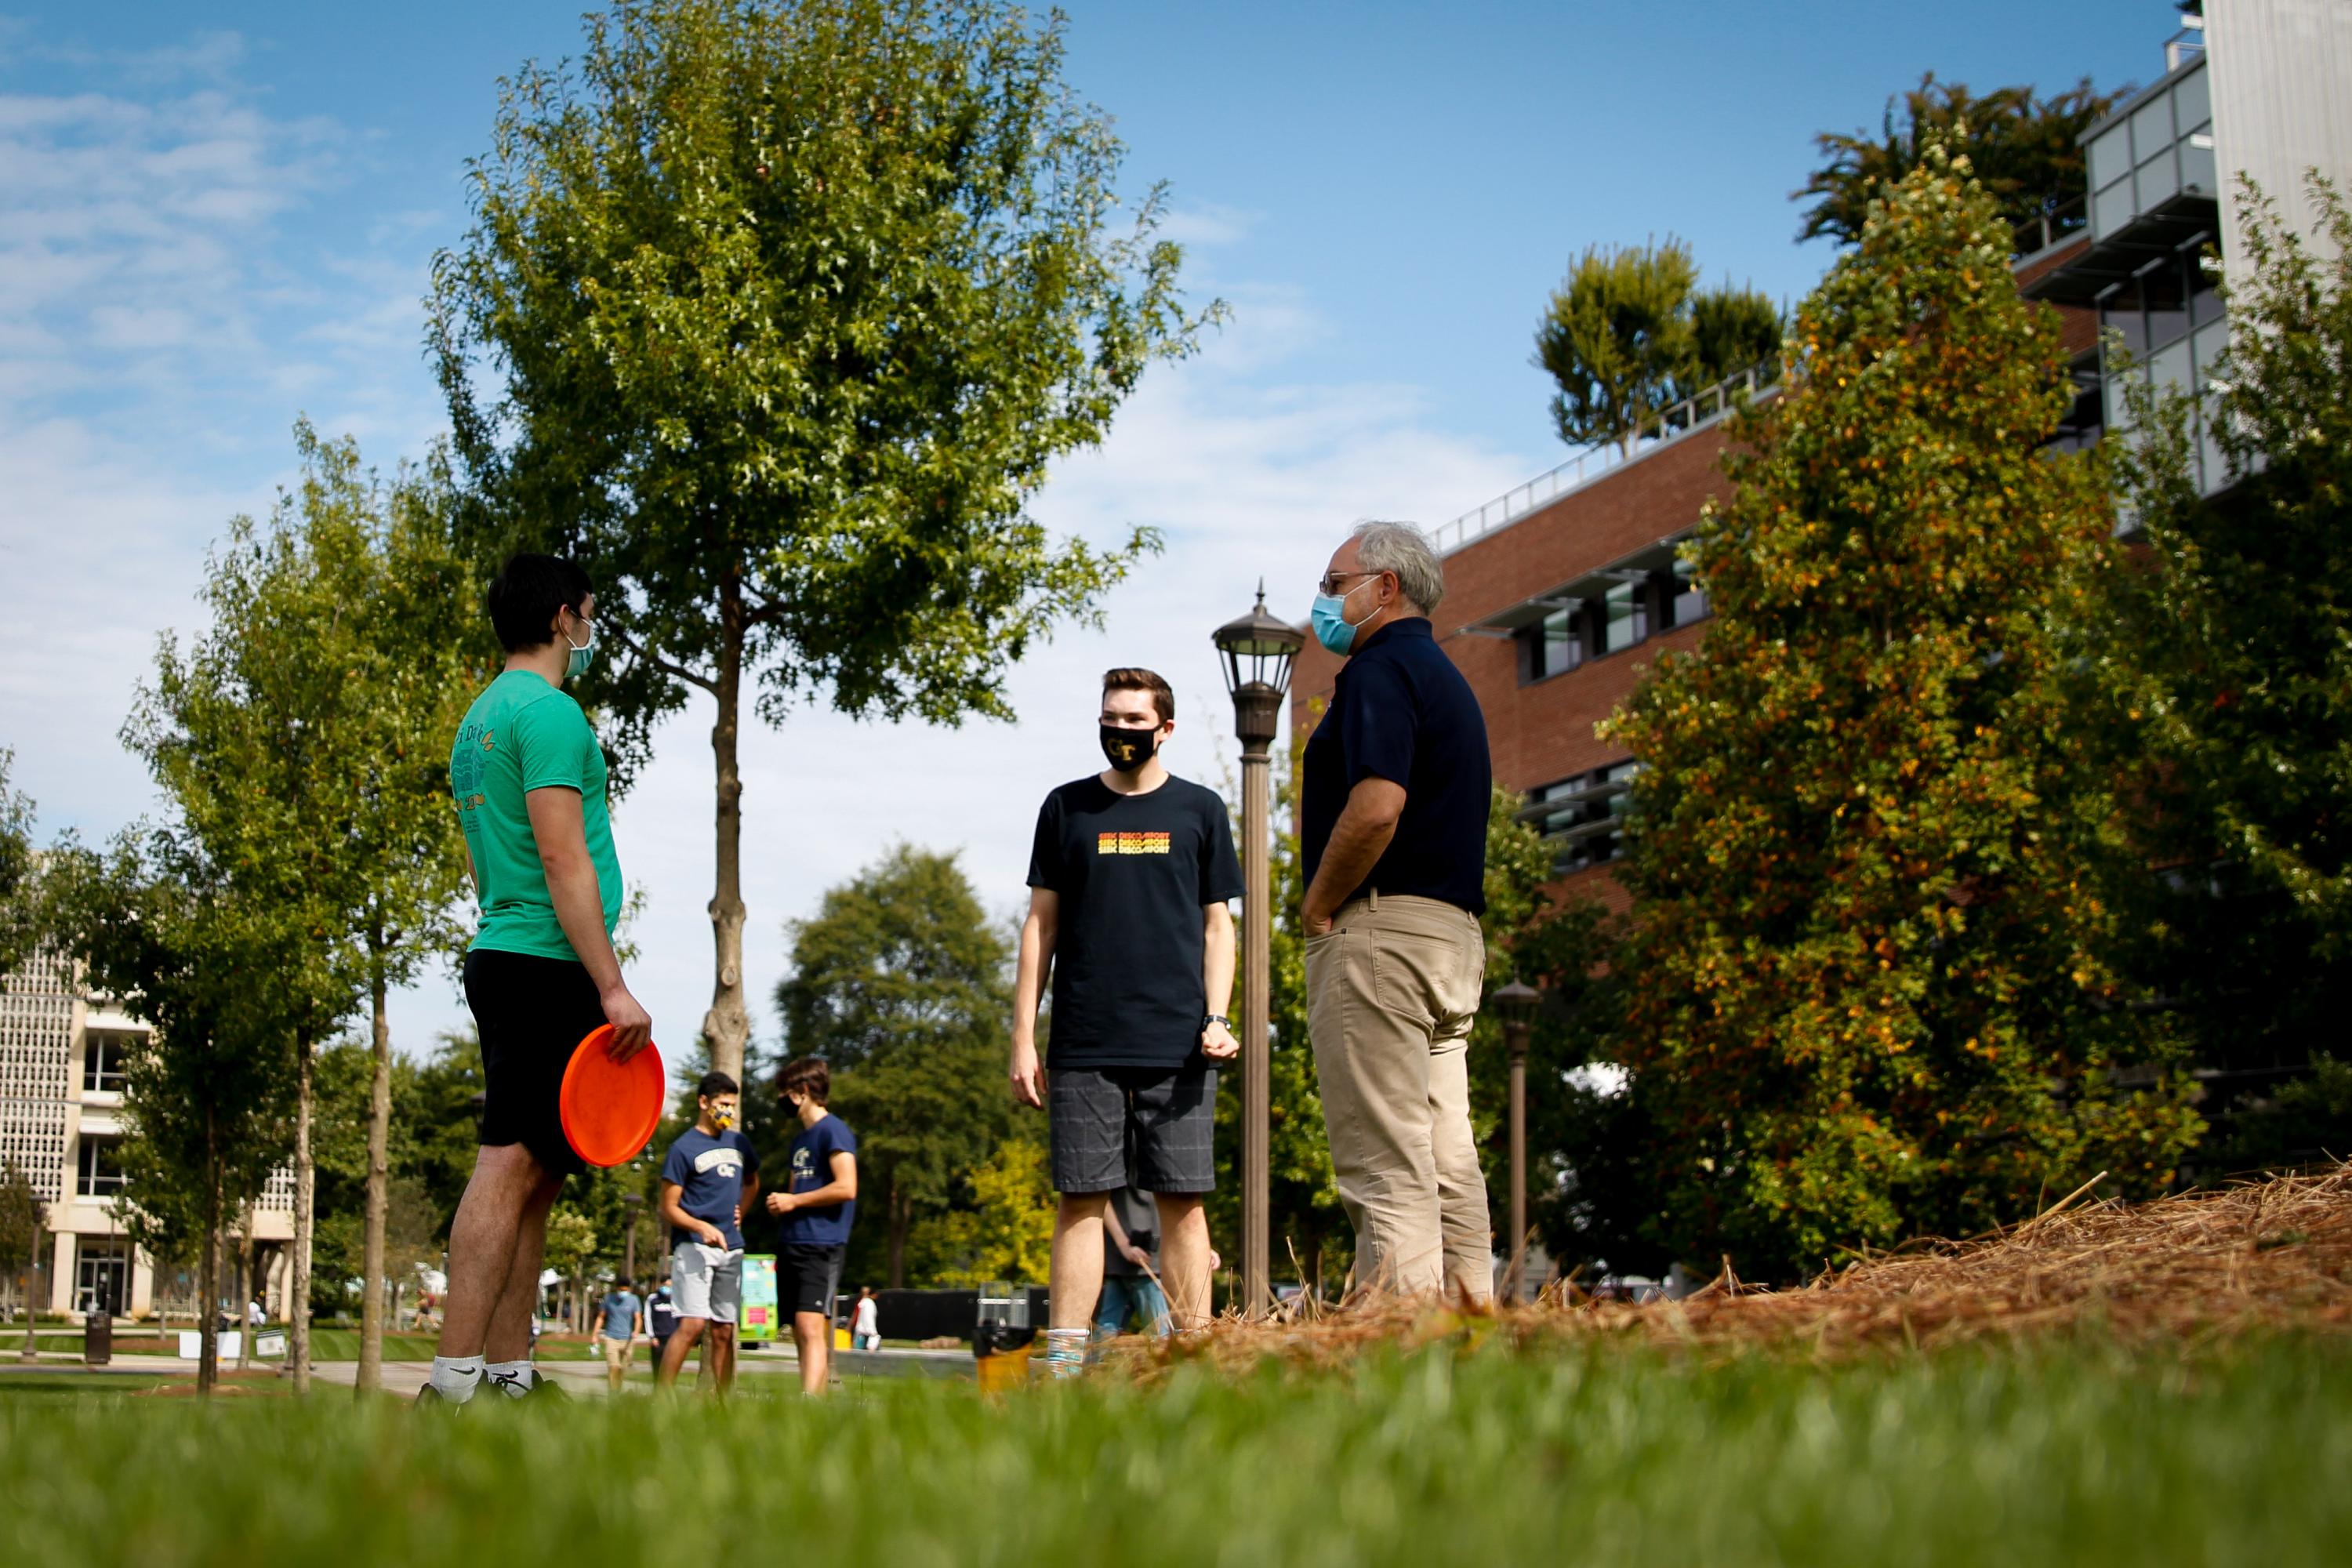 President Cabrera met Christopher Ozgo and Reed Blanchard on Tech Green to play frisbee and chat about the semester.